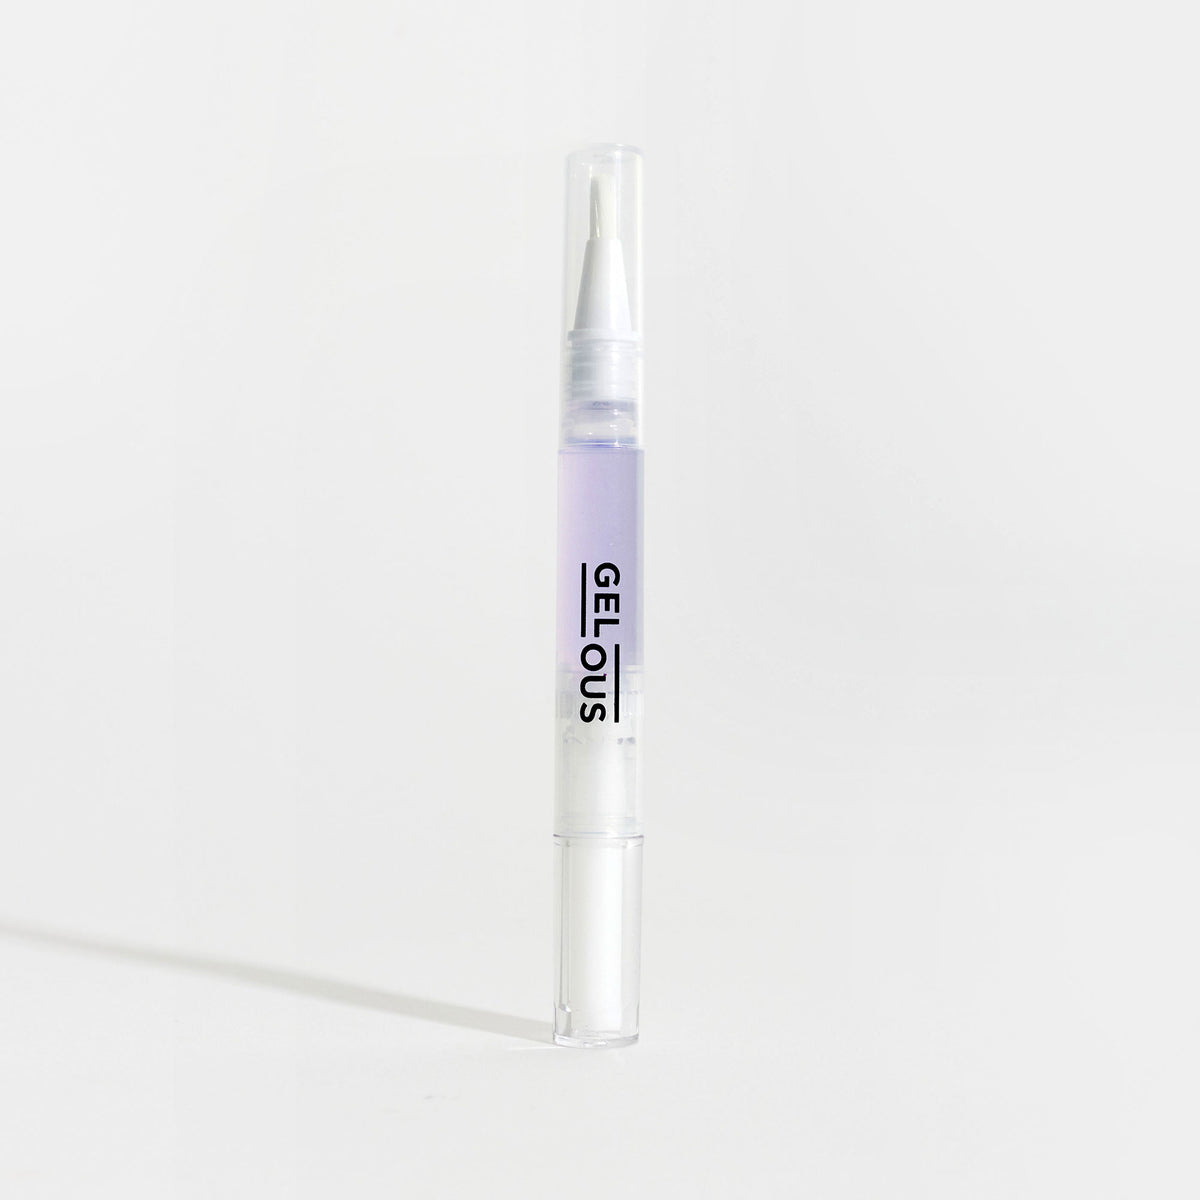 Gelous Lavender Cuticle Oil product photo - photographed in Australia